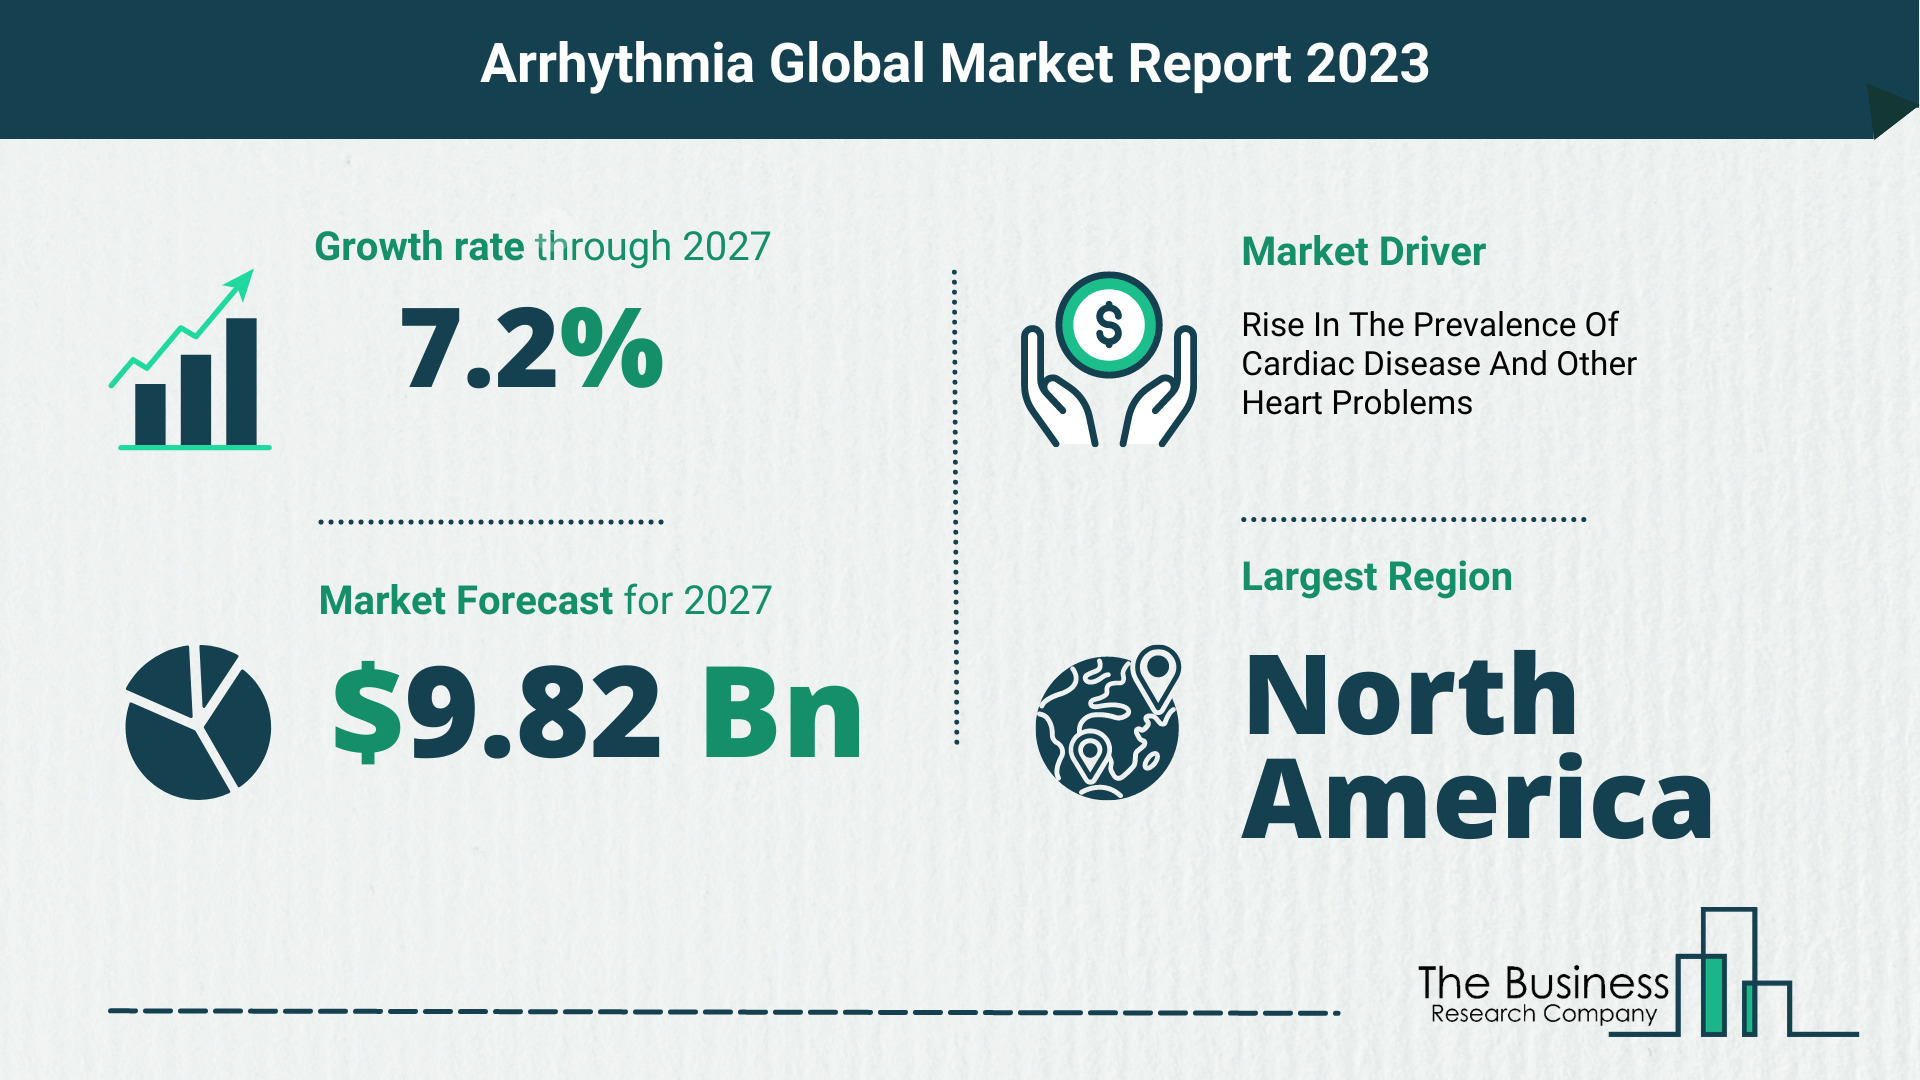 Global Arrhythmia Market Opportunities And Strategies 2023